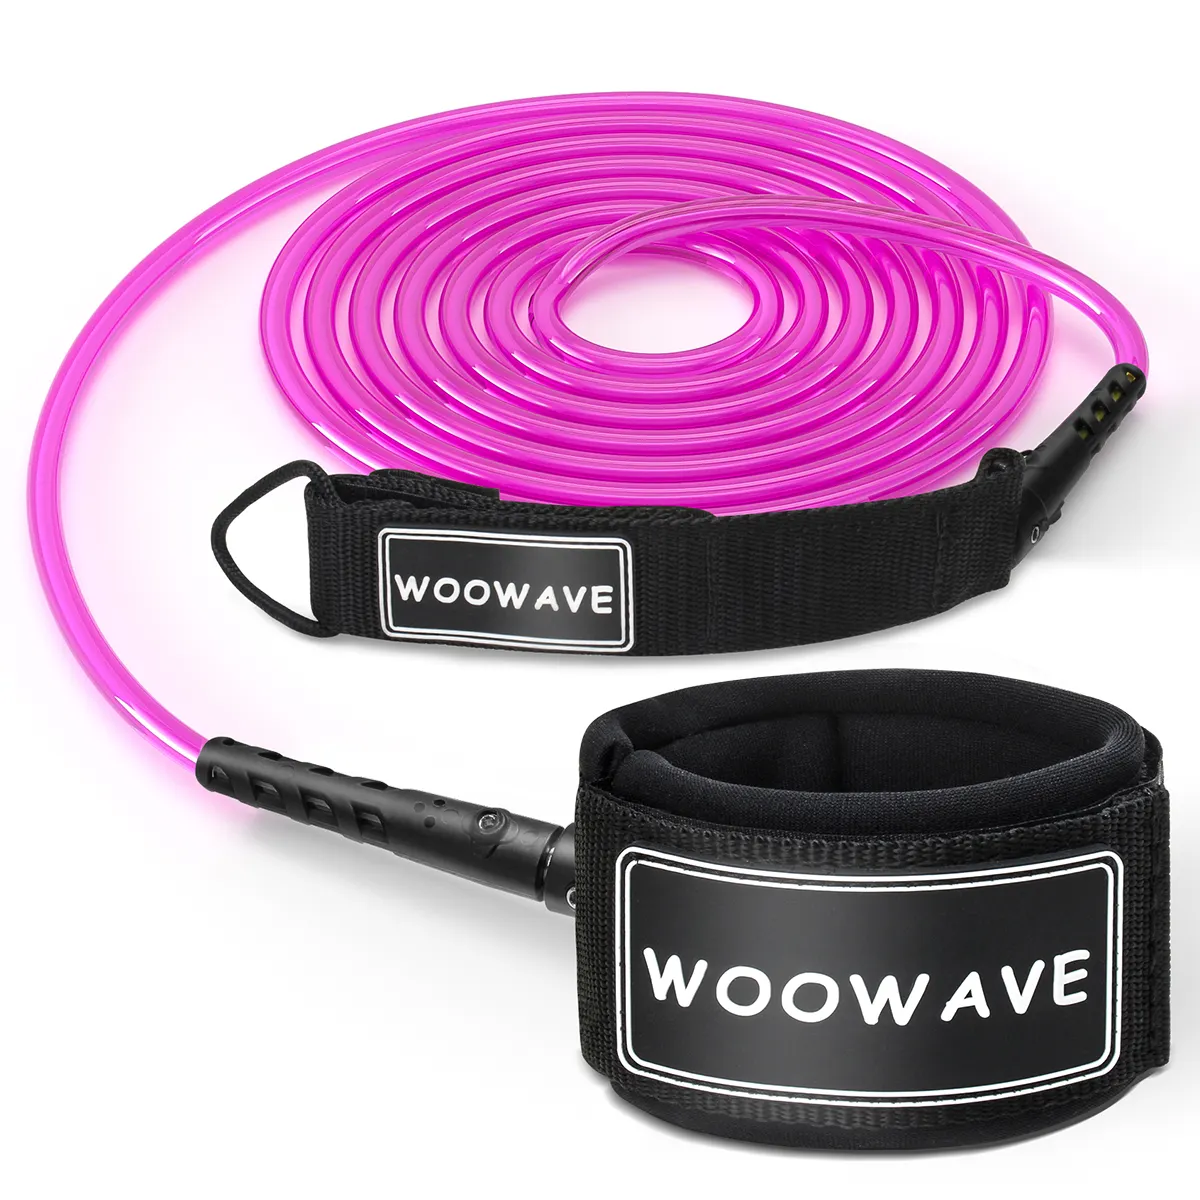 WOOWAVE Best Sale Cheap SUP Leash 11 Foot Coiled Stand Up Paddle Board Surfboard leash Surf Stay on Board Ankle Strap